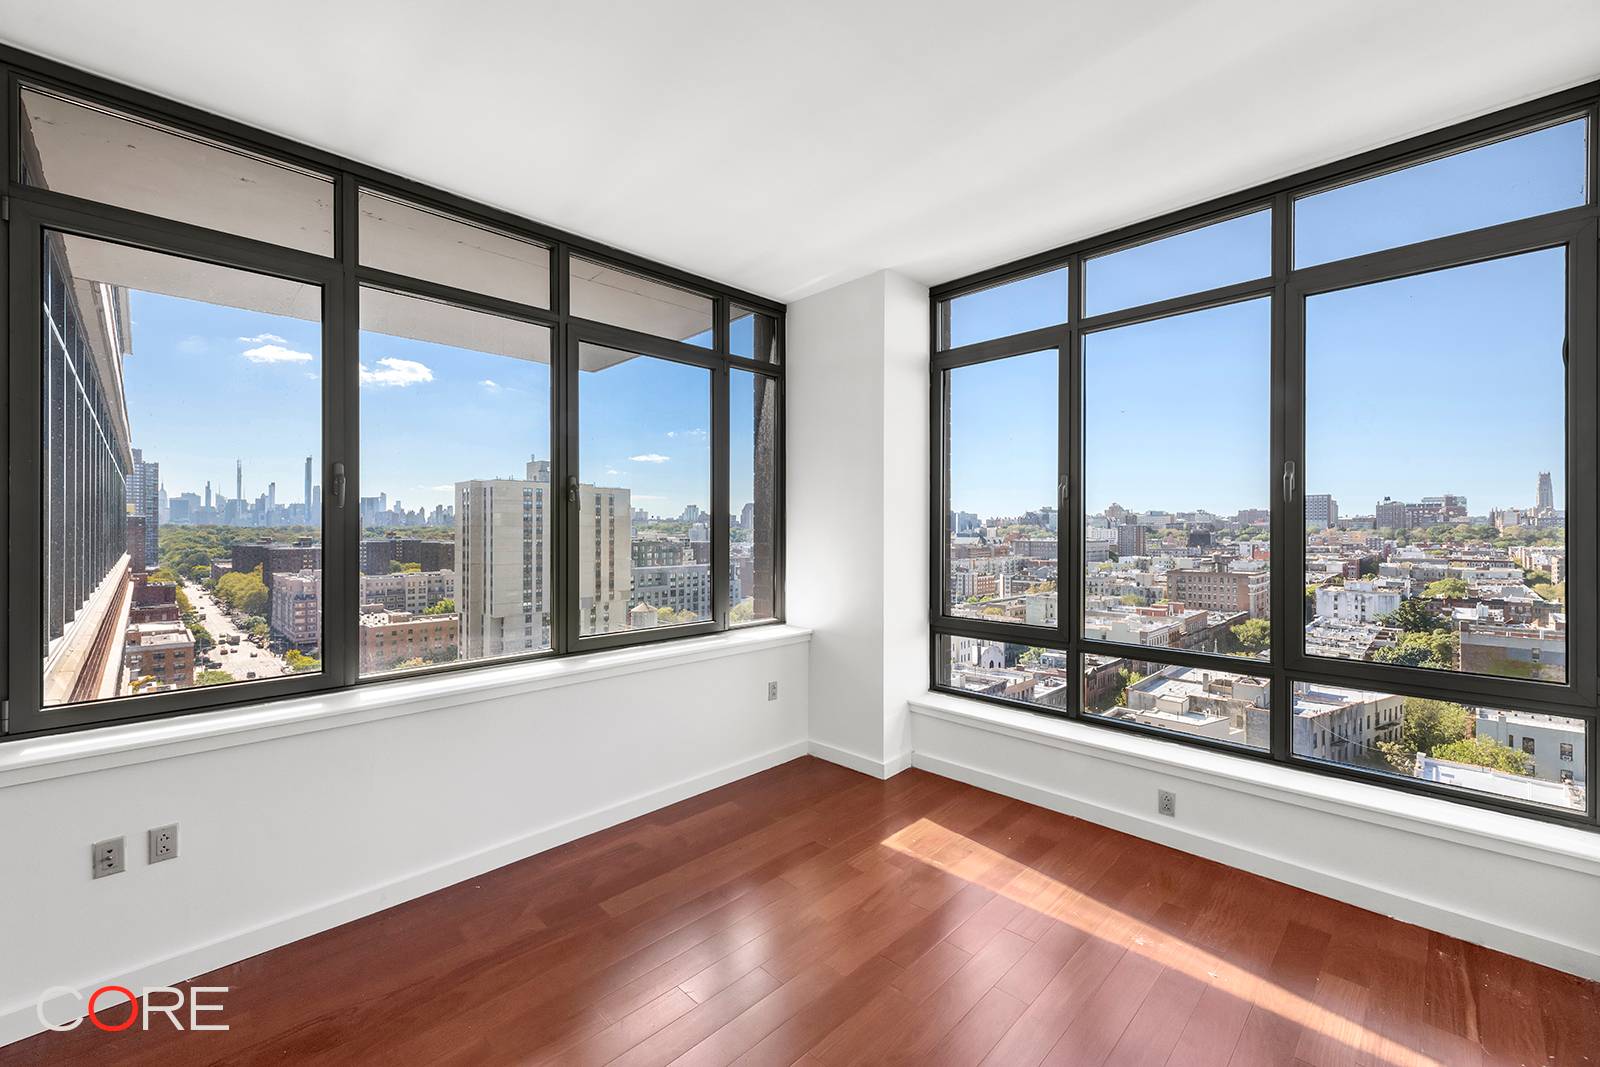 Enjoy sweeping Central Park and city views from this well proportioned, two bedroom, two bathroom home at Fifth on the Park.